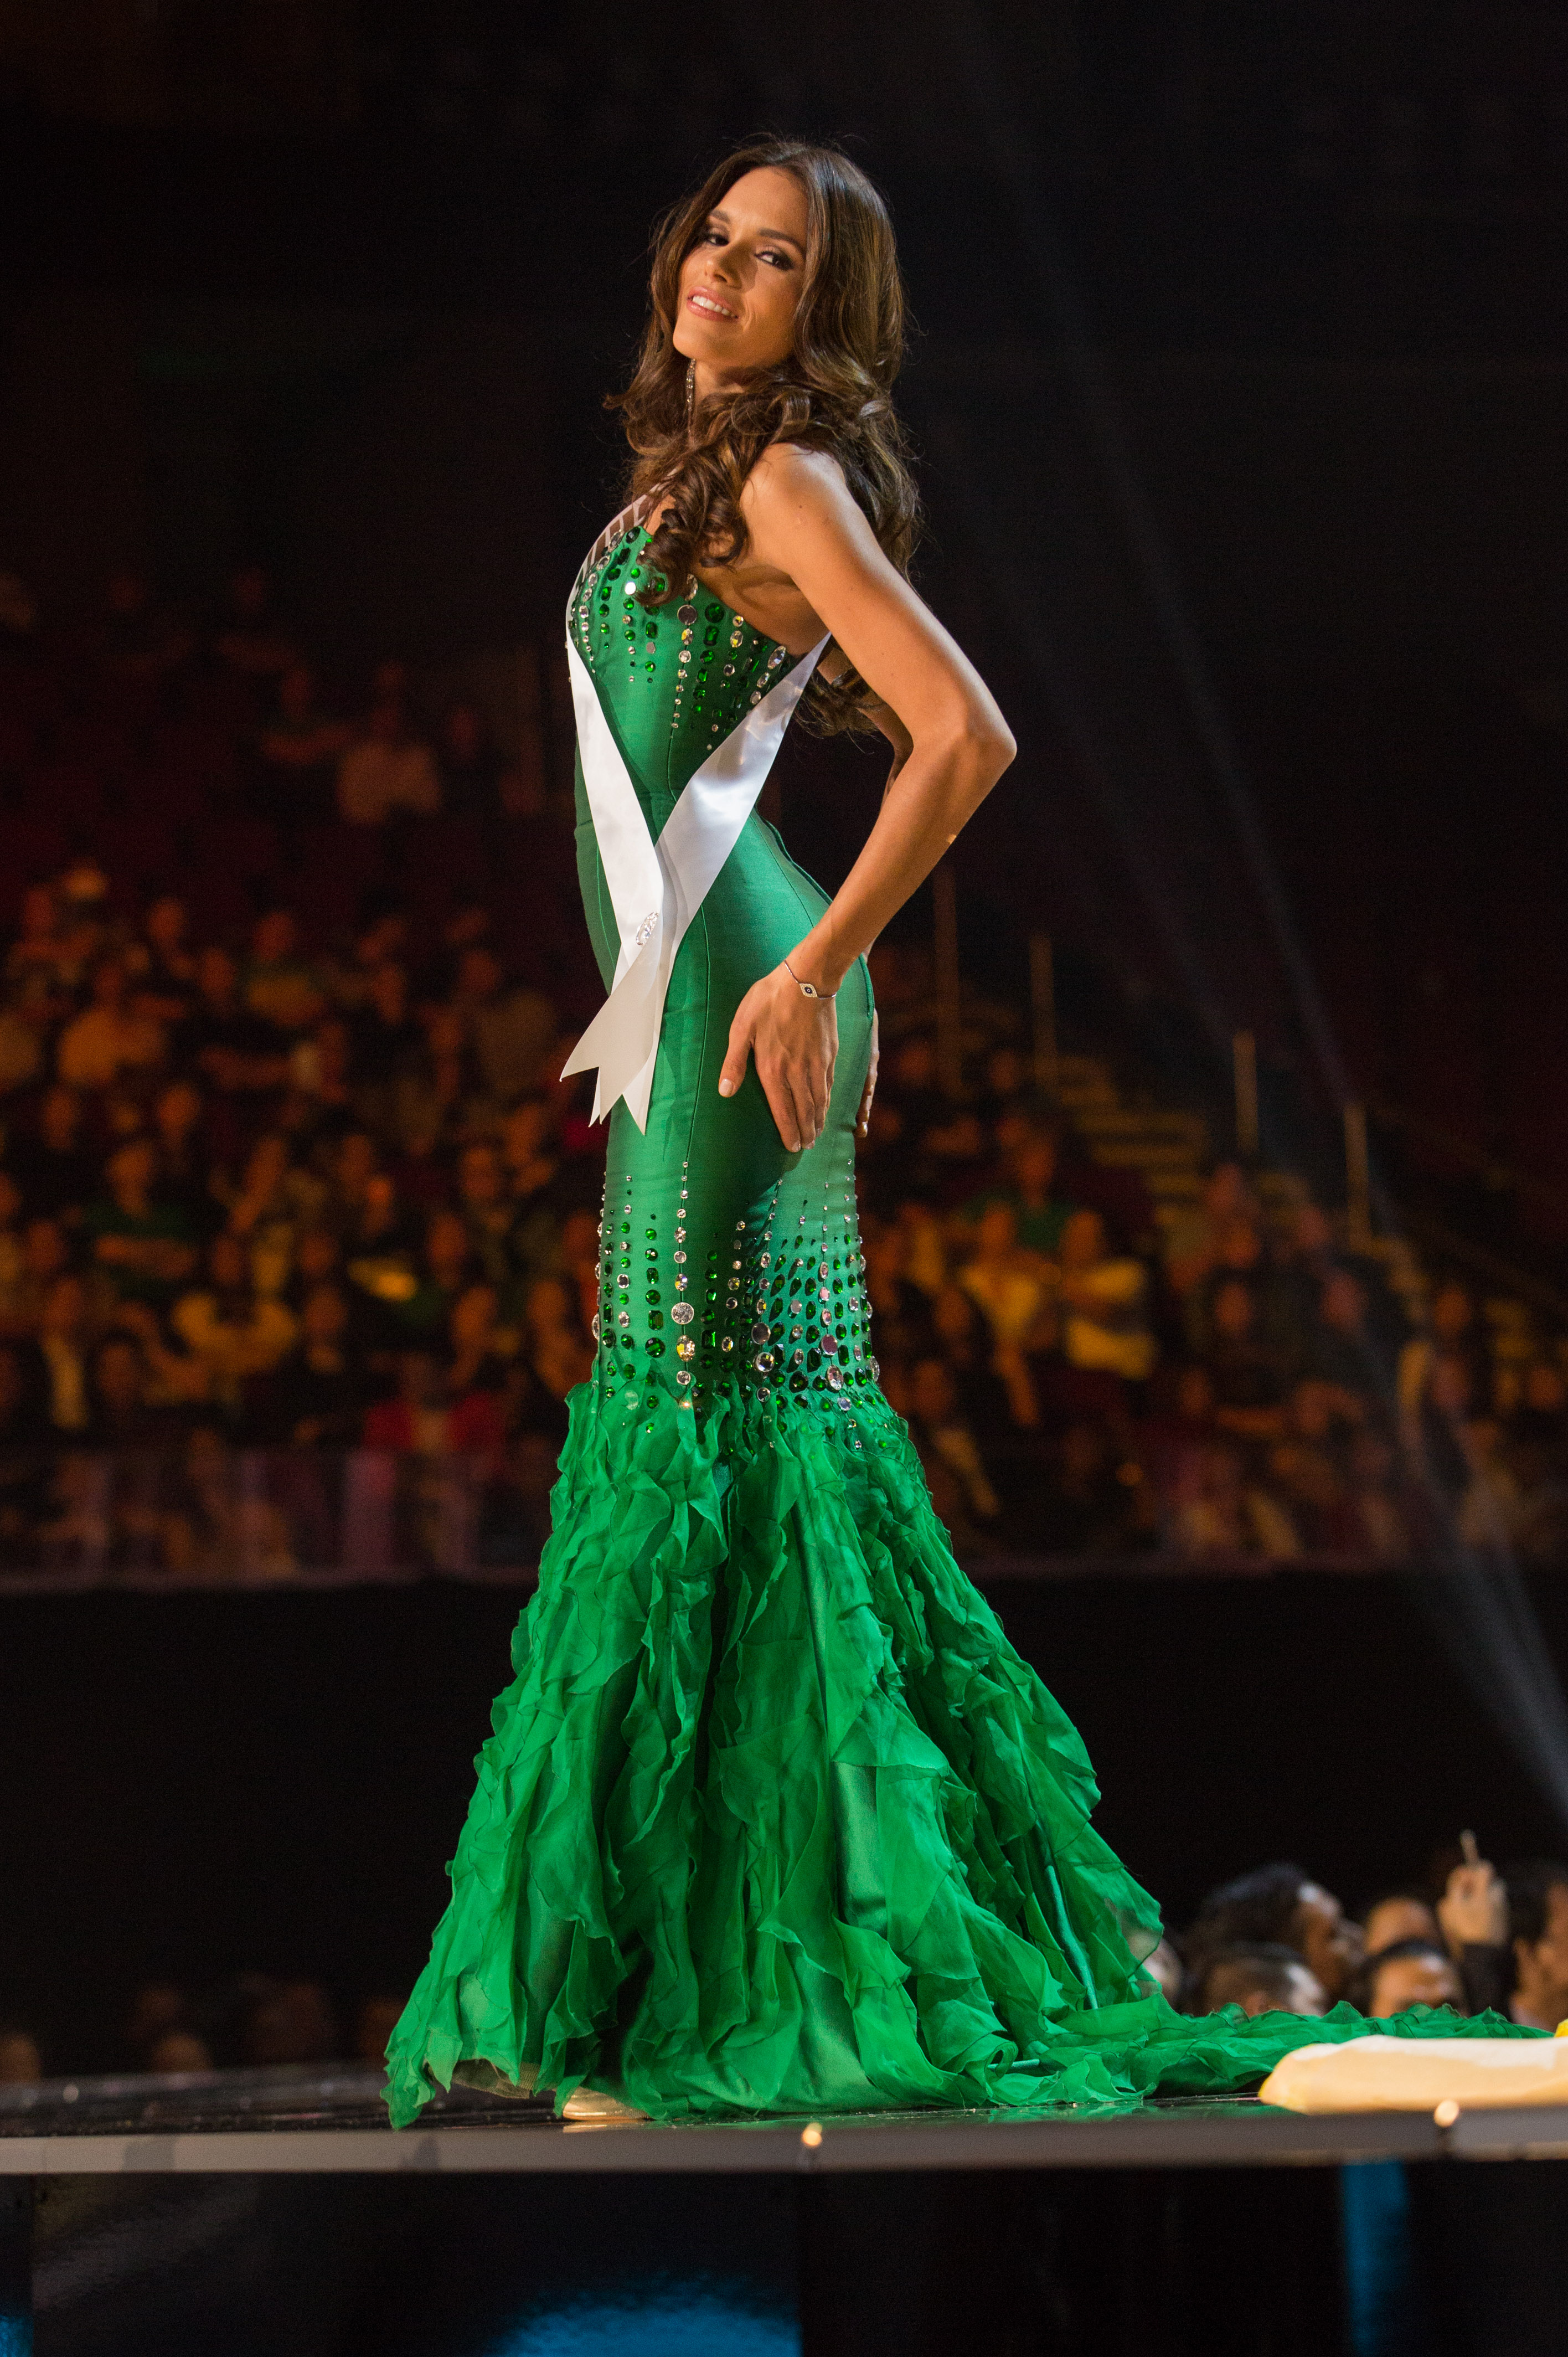 Catalina Paz Caceres, Miss Chile 2016 